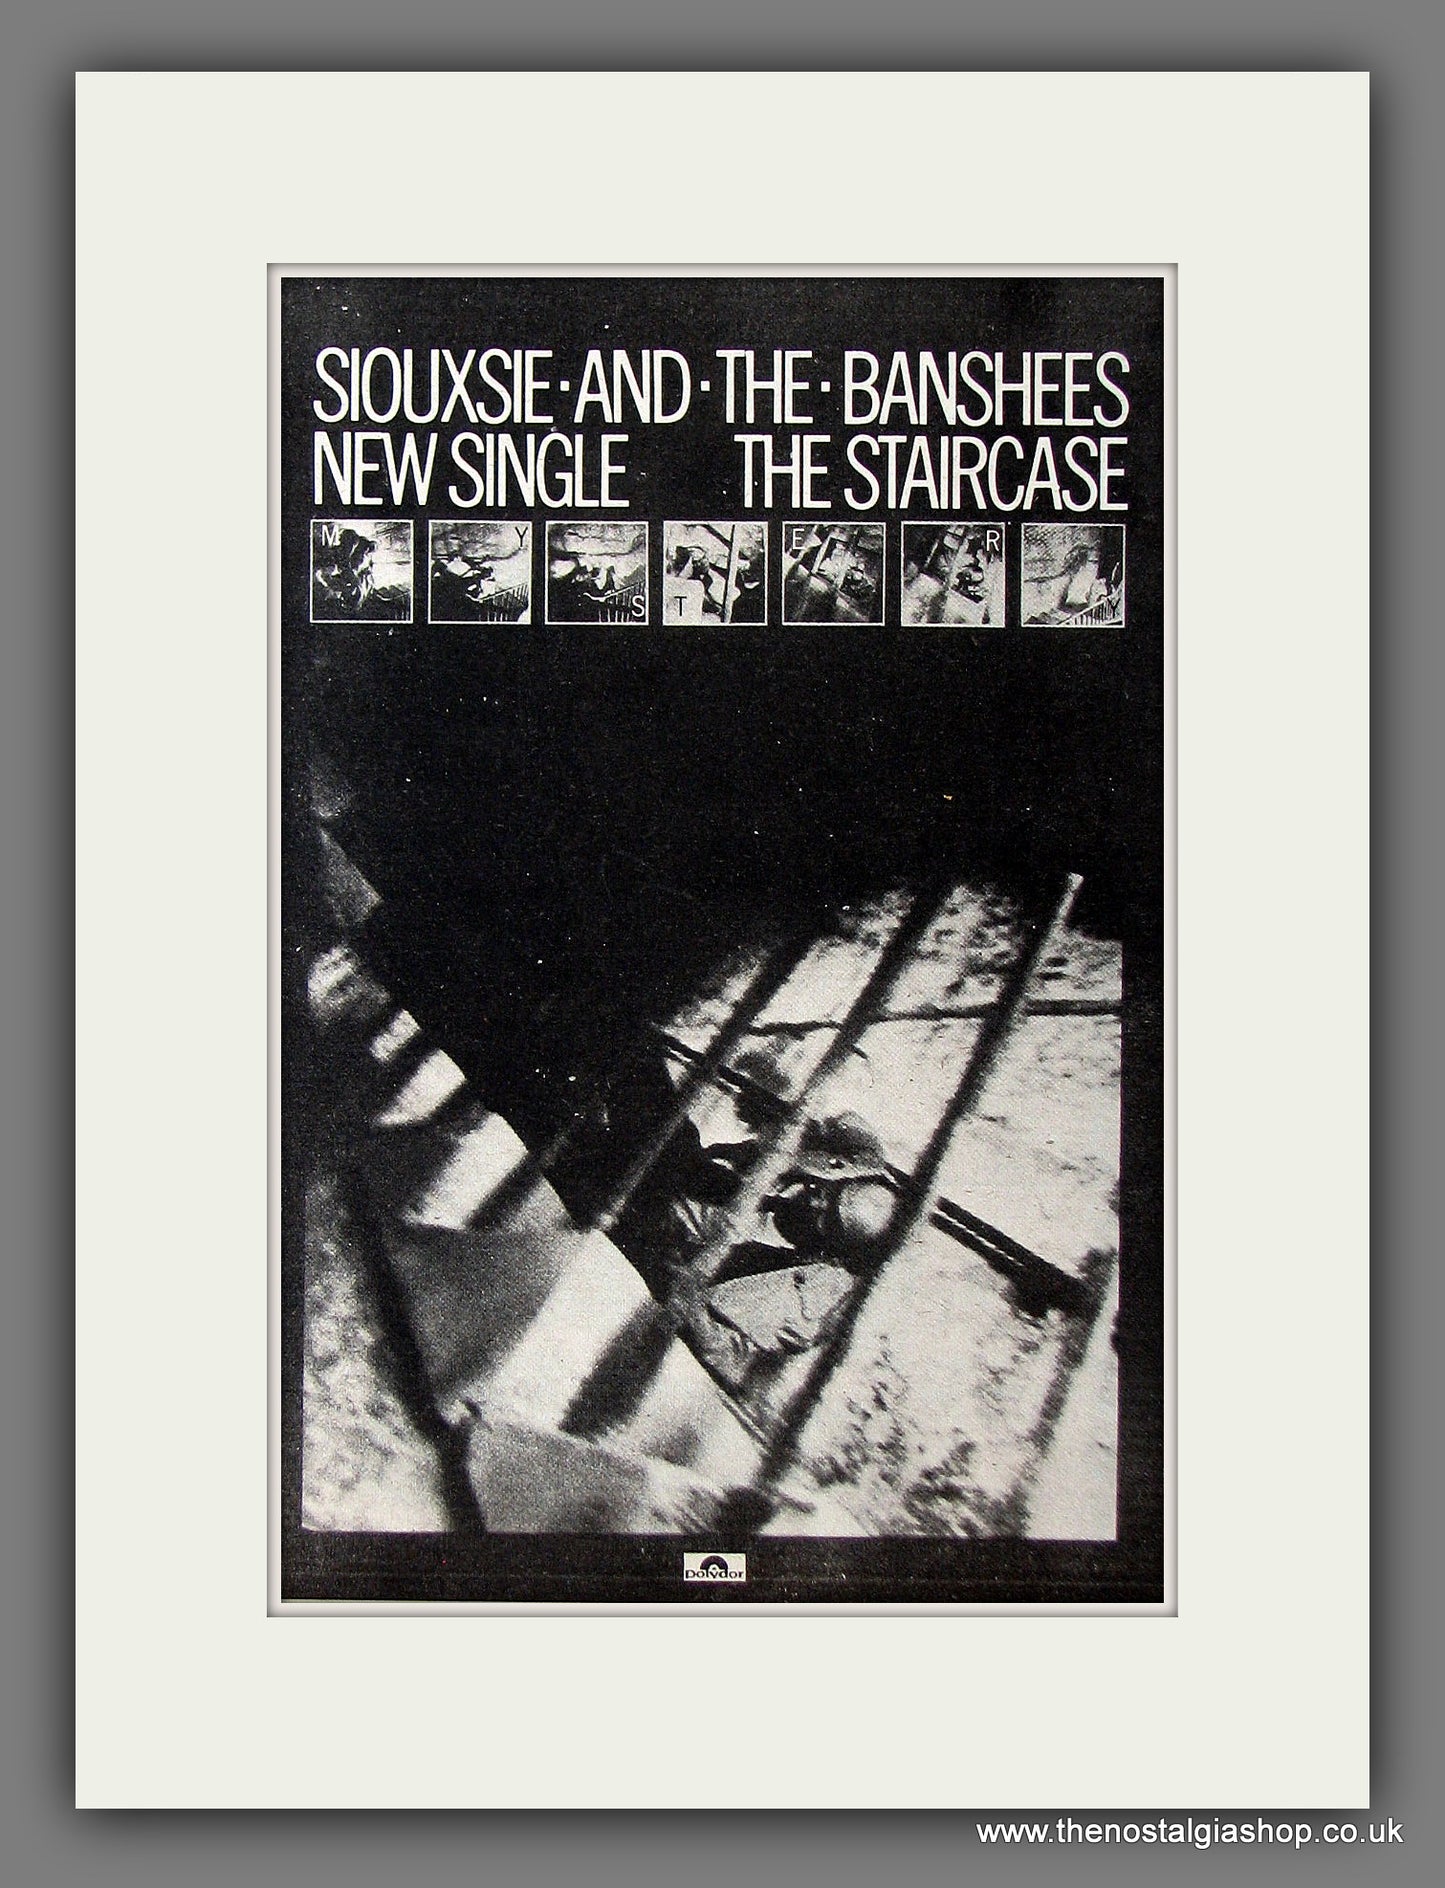 Siouxsie And The Banshees The Staircase. Original Vintage Advert 1977 (ref AD56375)